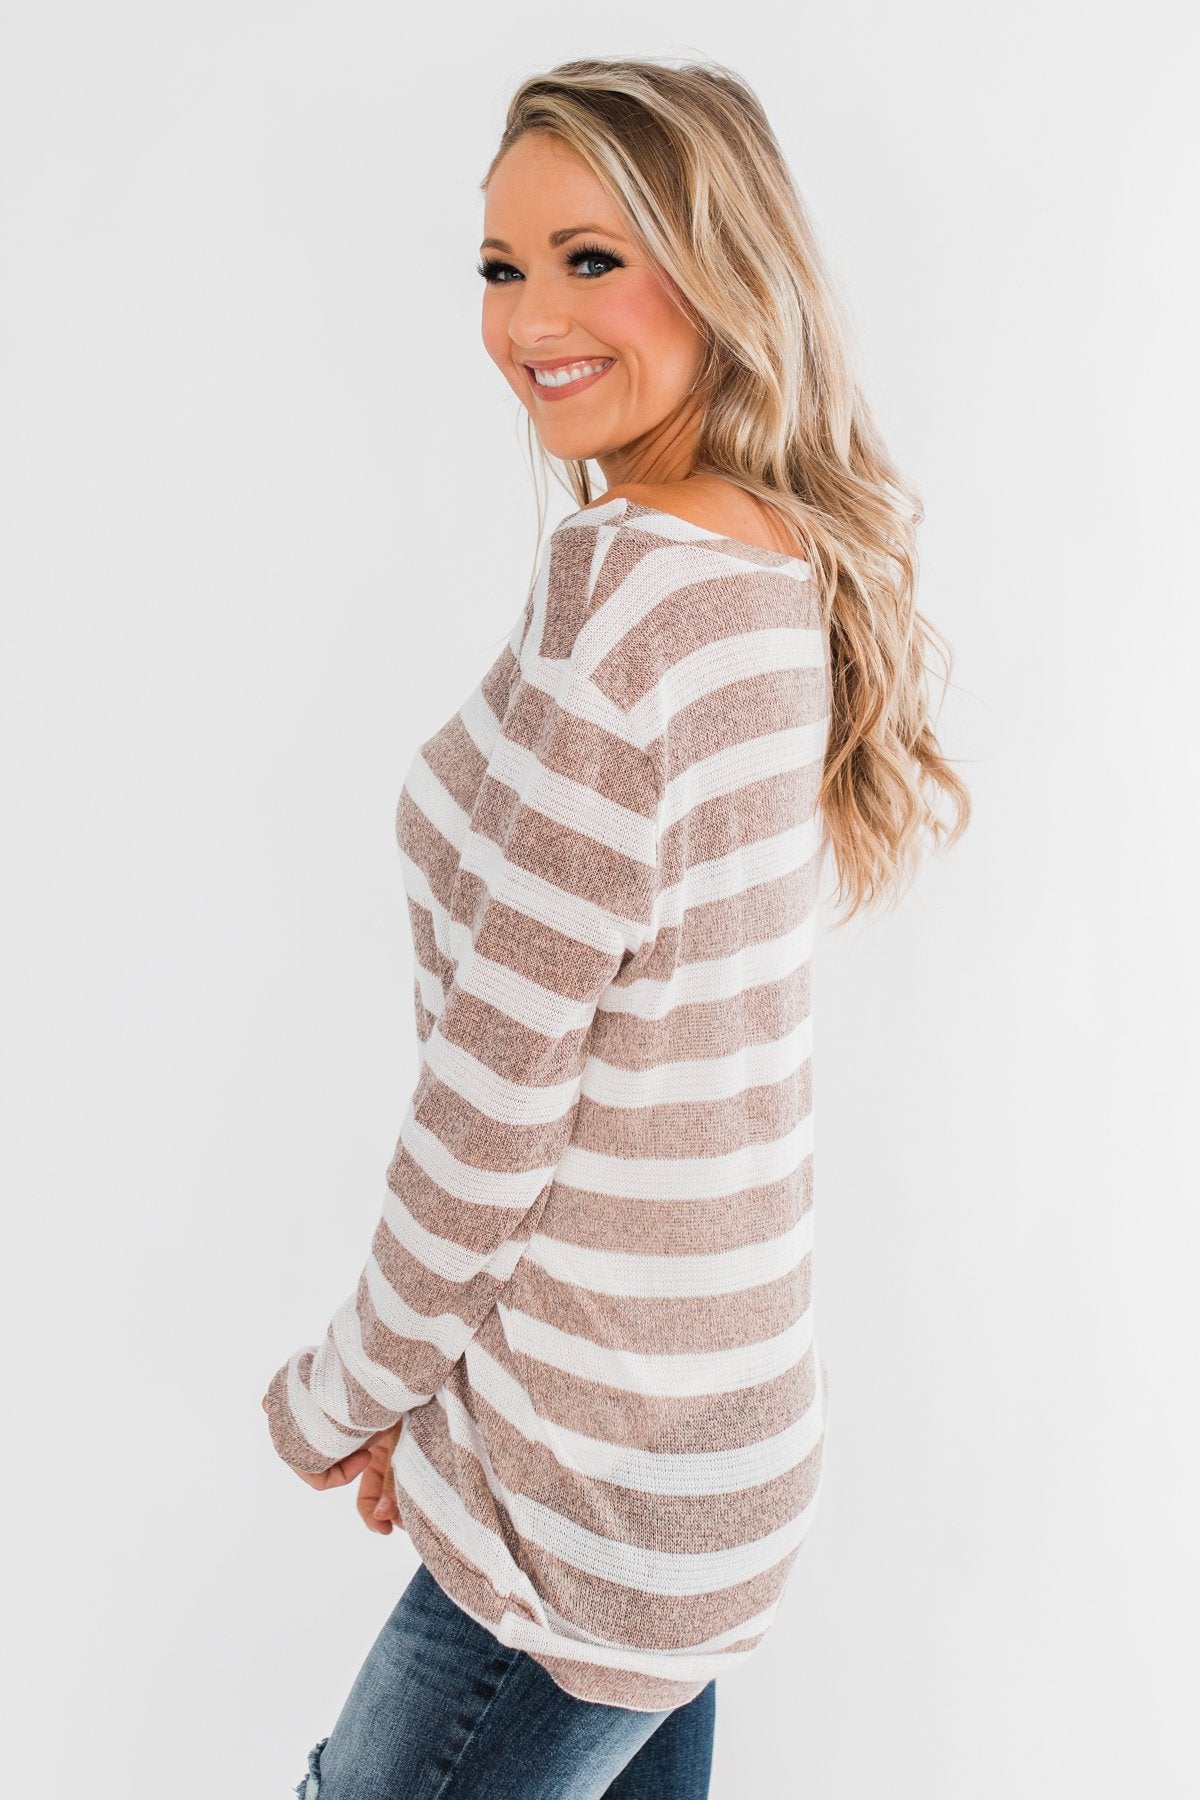 Just As You Are Striped Knit Top- Taupe – The Pulse Boutique